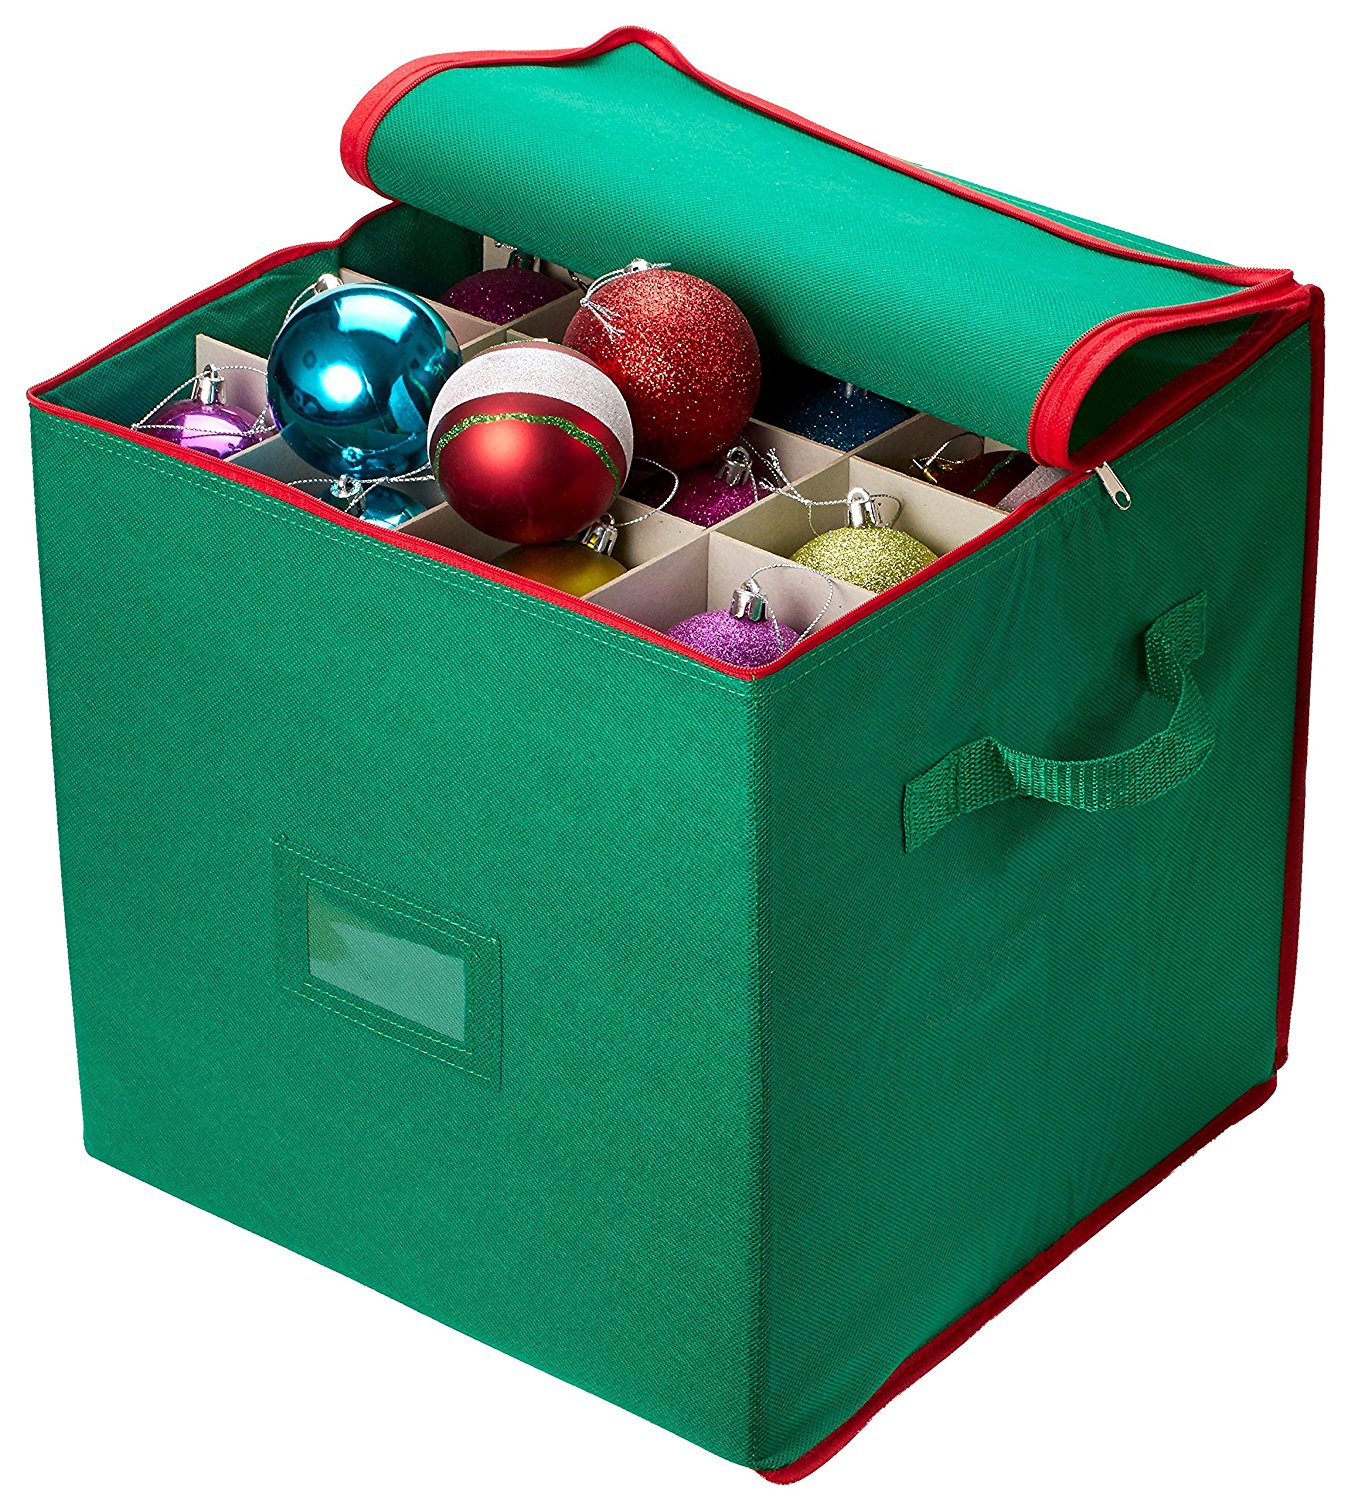 Christmas Ornament Storage - Stores up to 64 Holiday Ornaments, Adjustable  Dividers, Covered Top, Two Handles. Attractive Storage Box Keeps Holiday  Decorations Clean and Dry for Next Season. (Green)